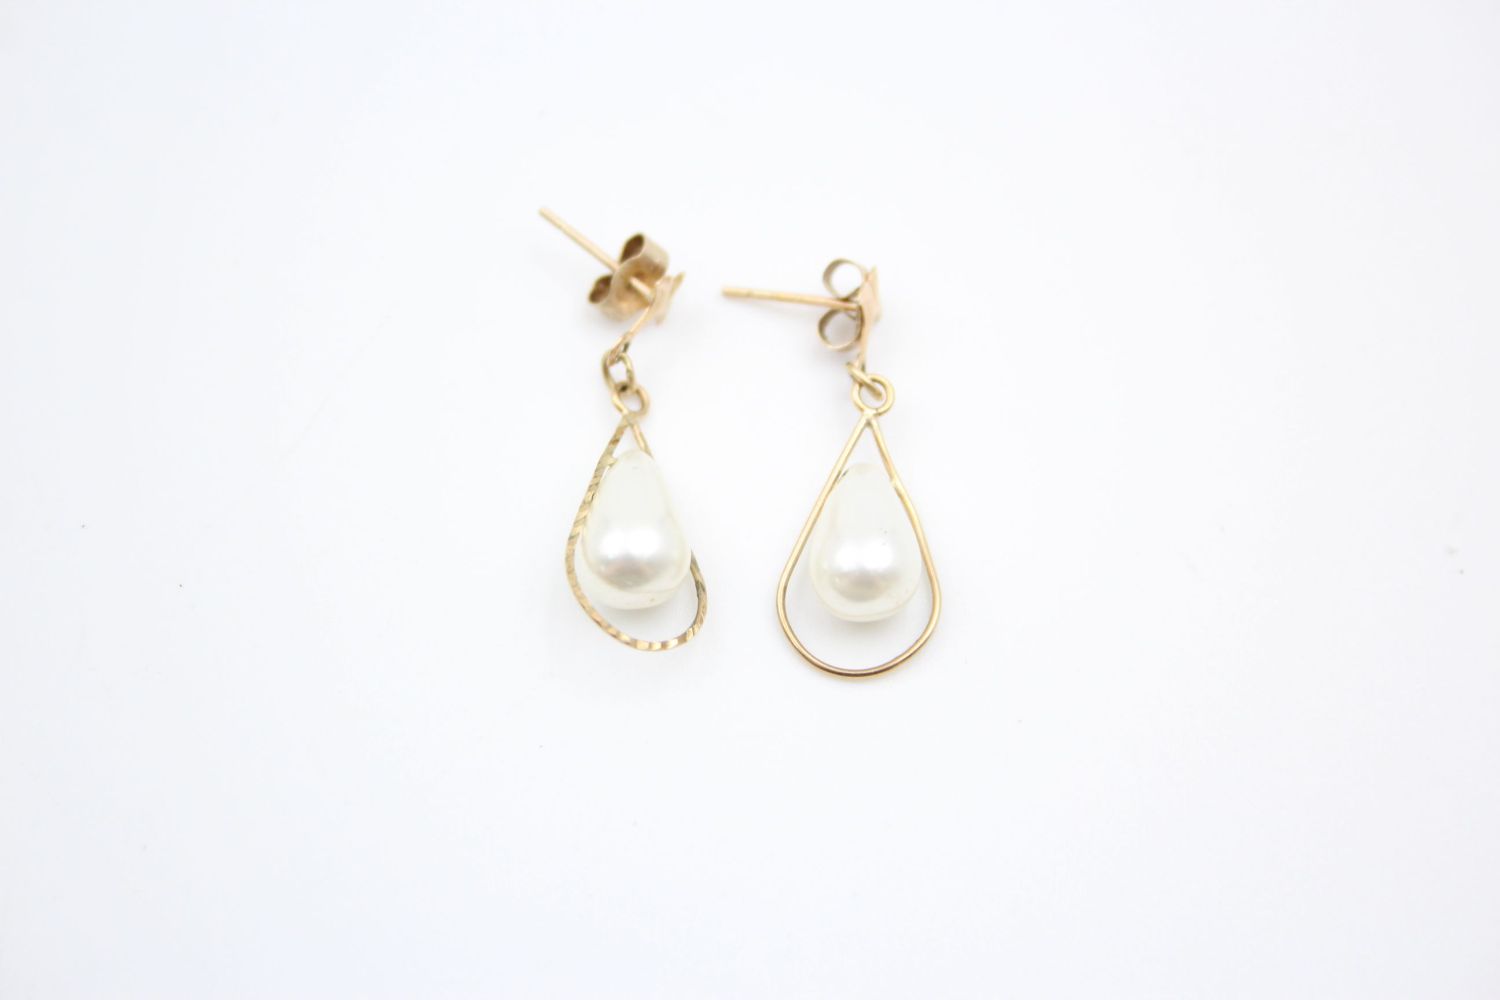 3 x 9ct gold faux pearl earrings 2.4 grams gross - Image 5 of 11